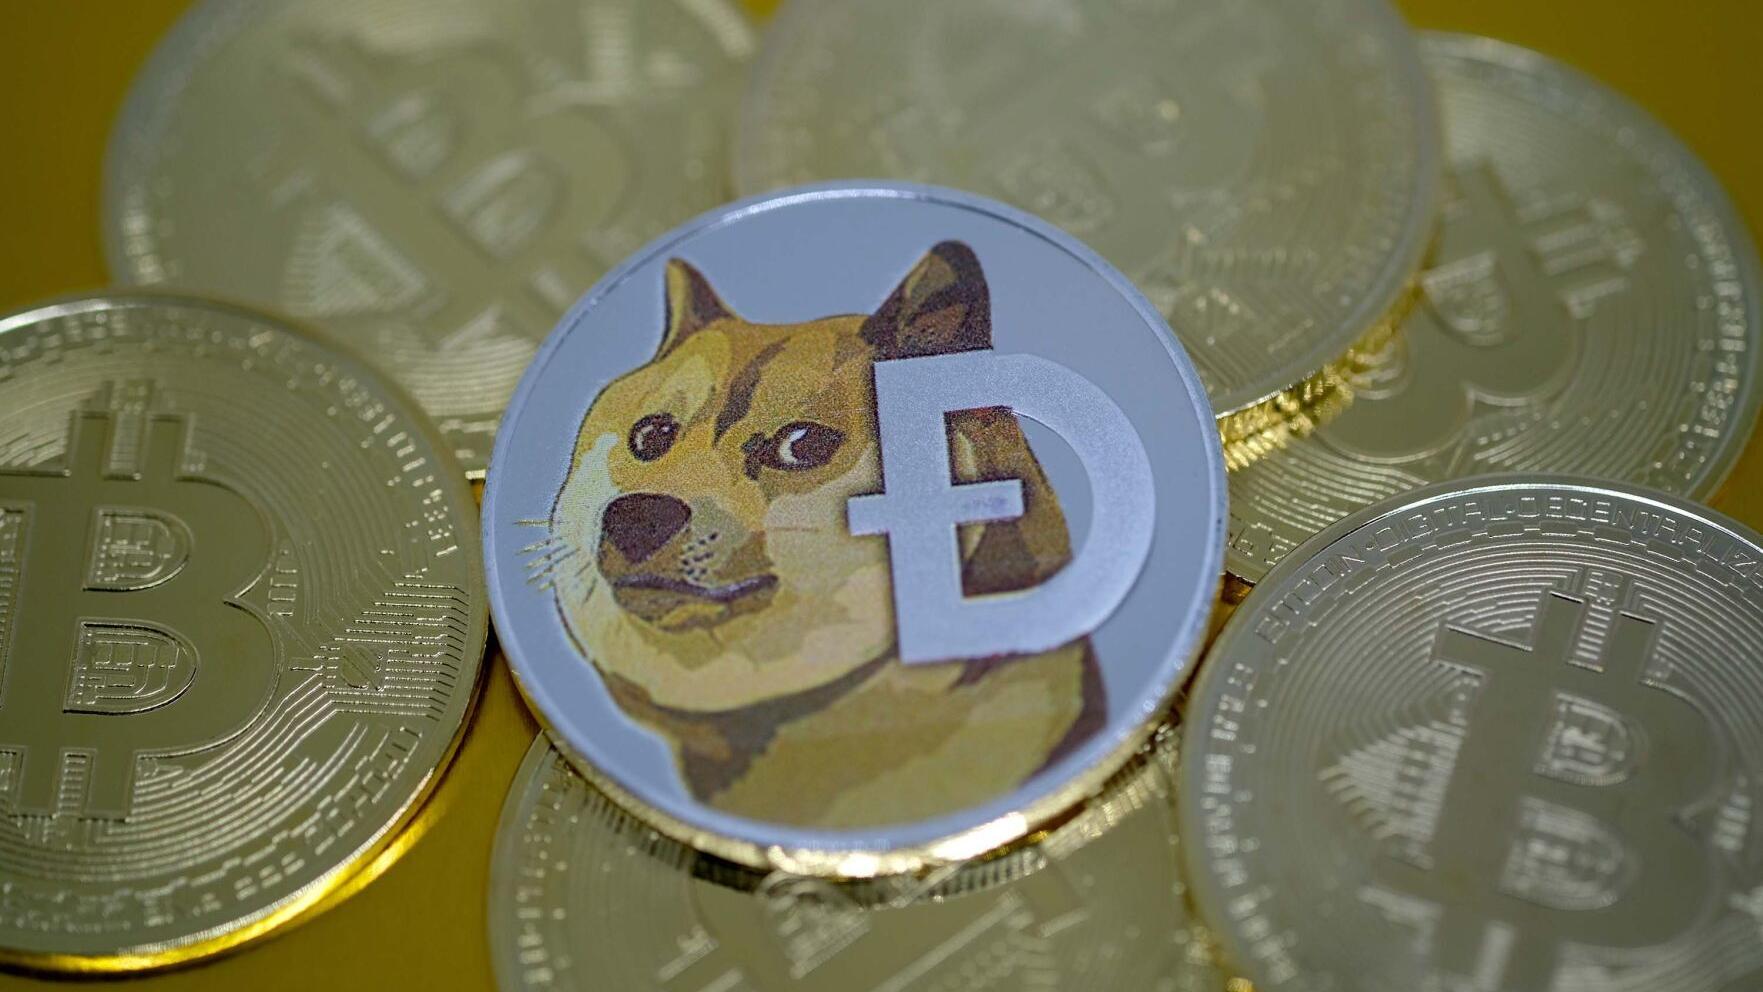 can i purchase dogecoin on fidelity